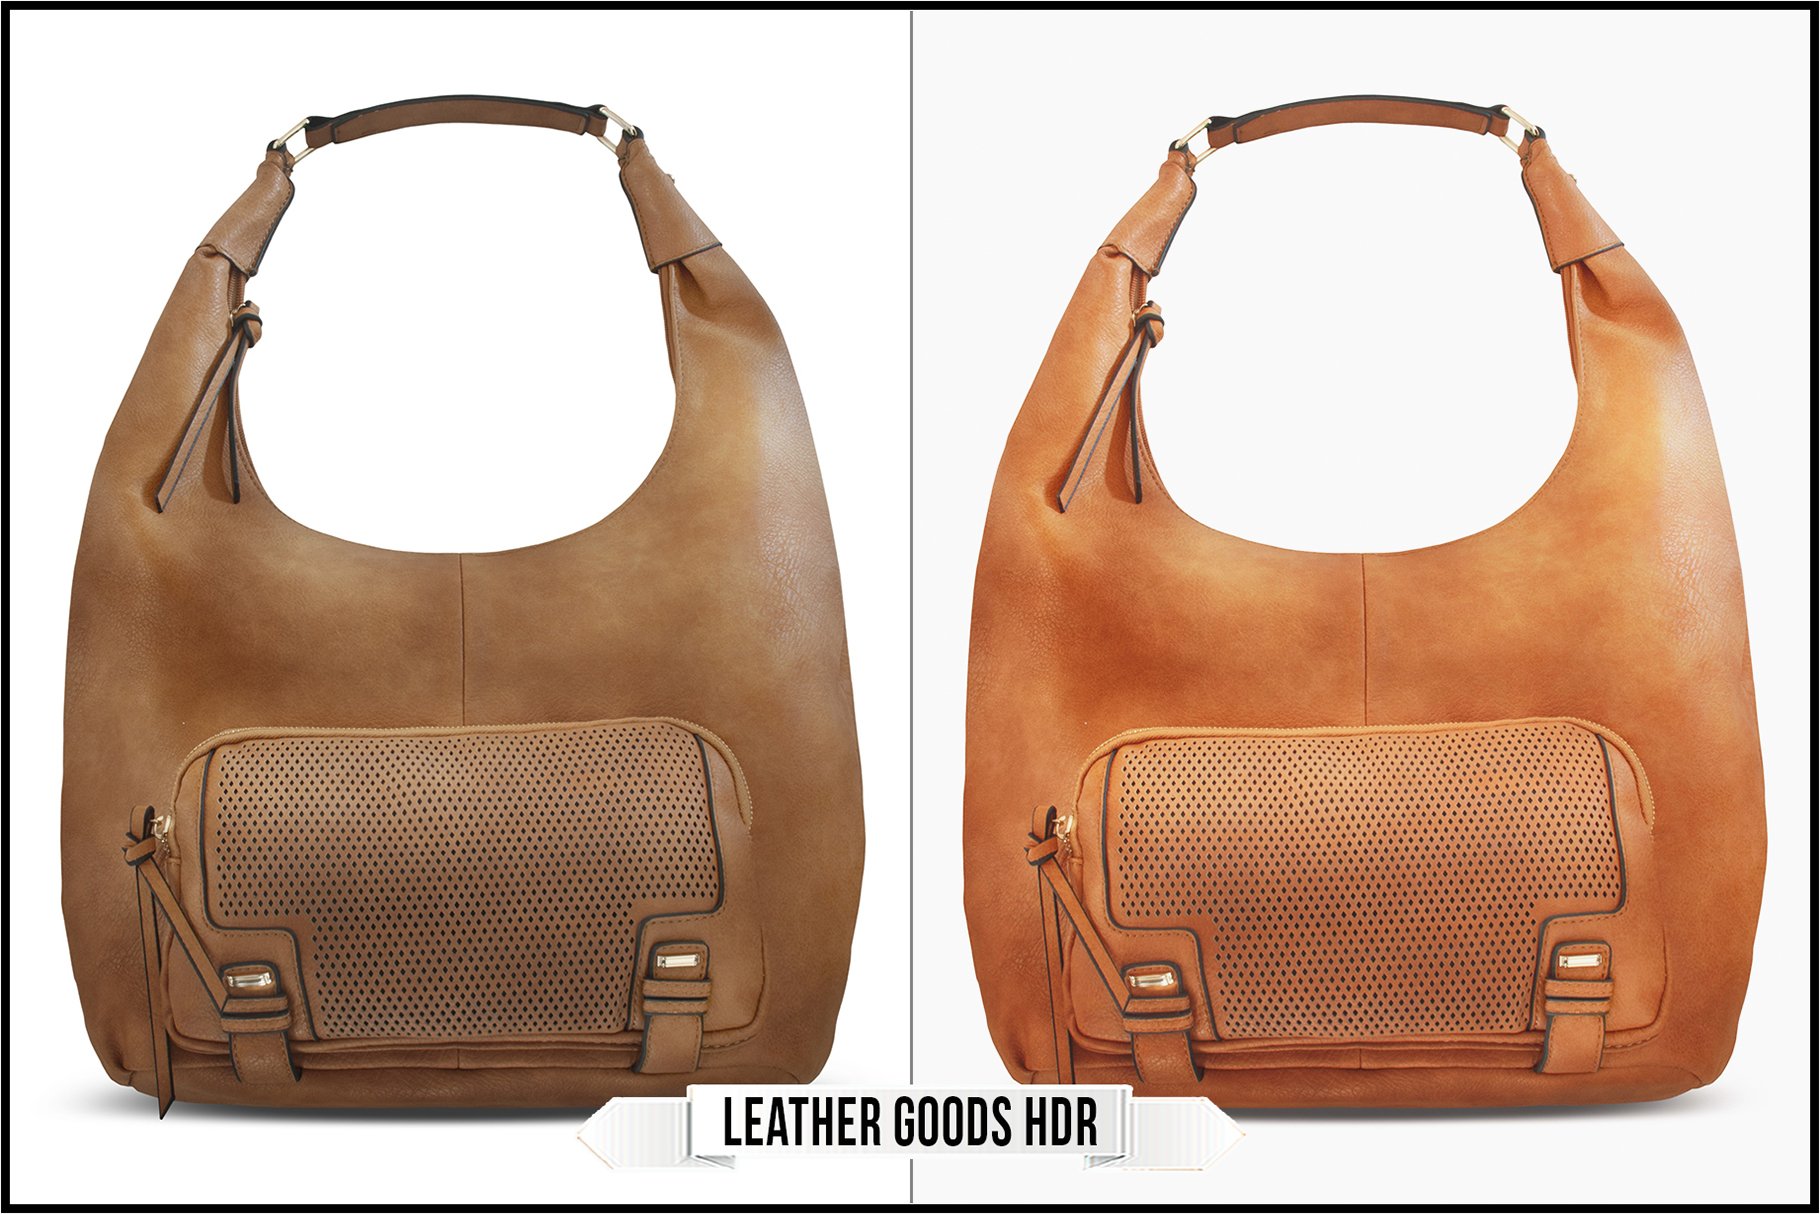 leather goods hdr 108